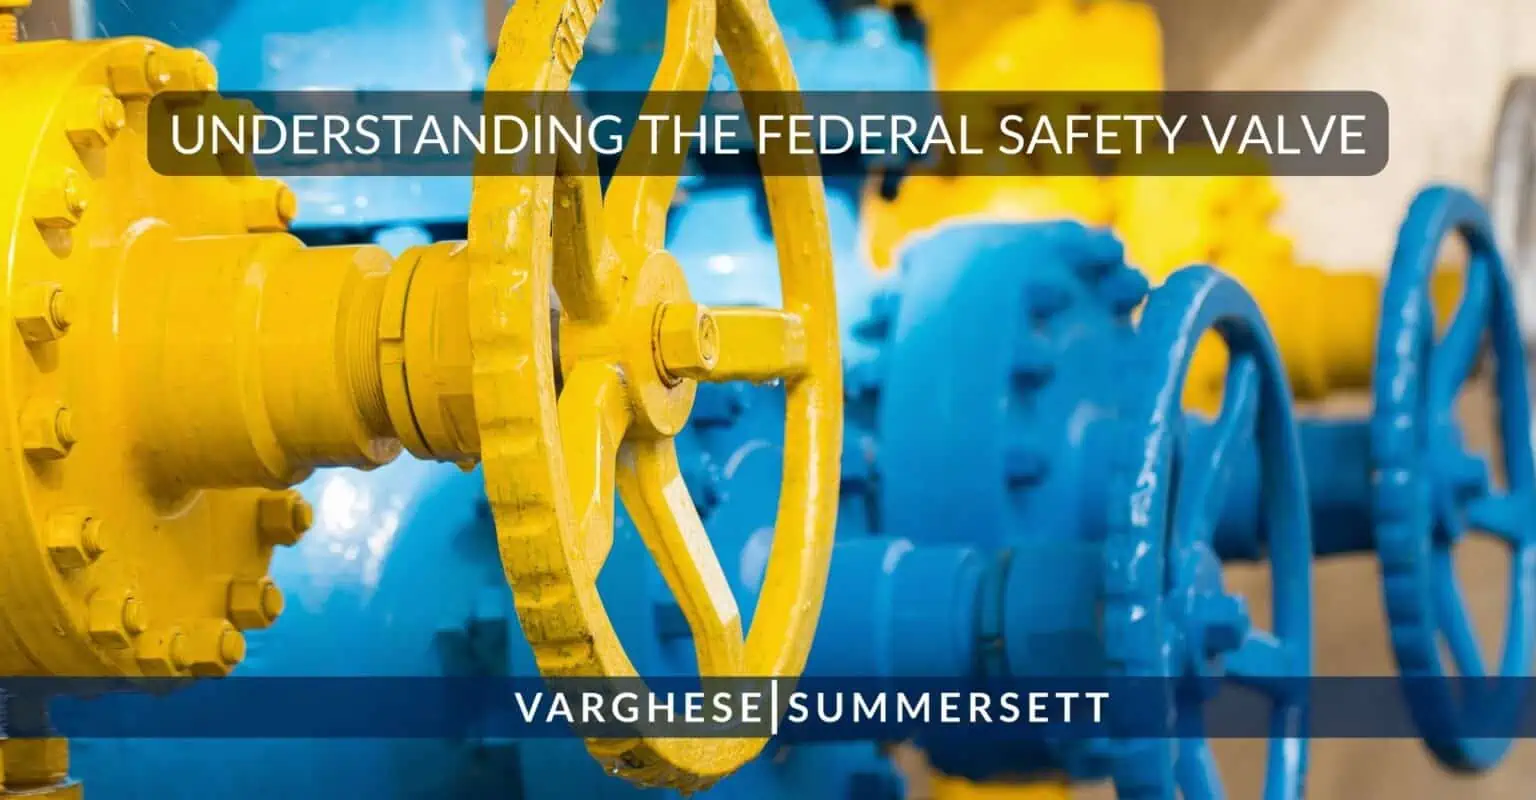 the federal safety valve can make a meaningful difference on sentencing